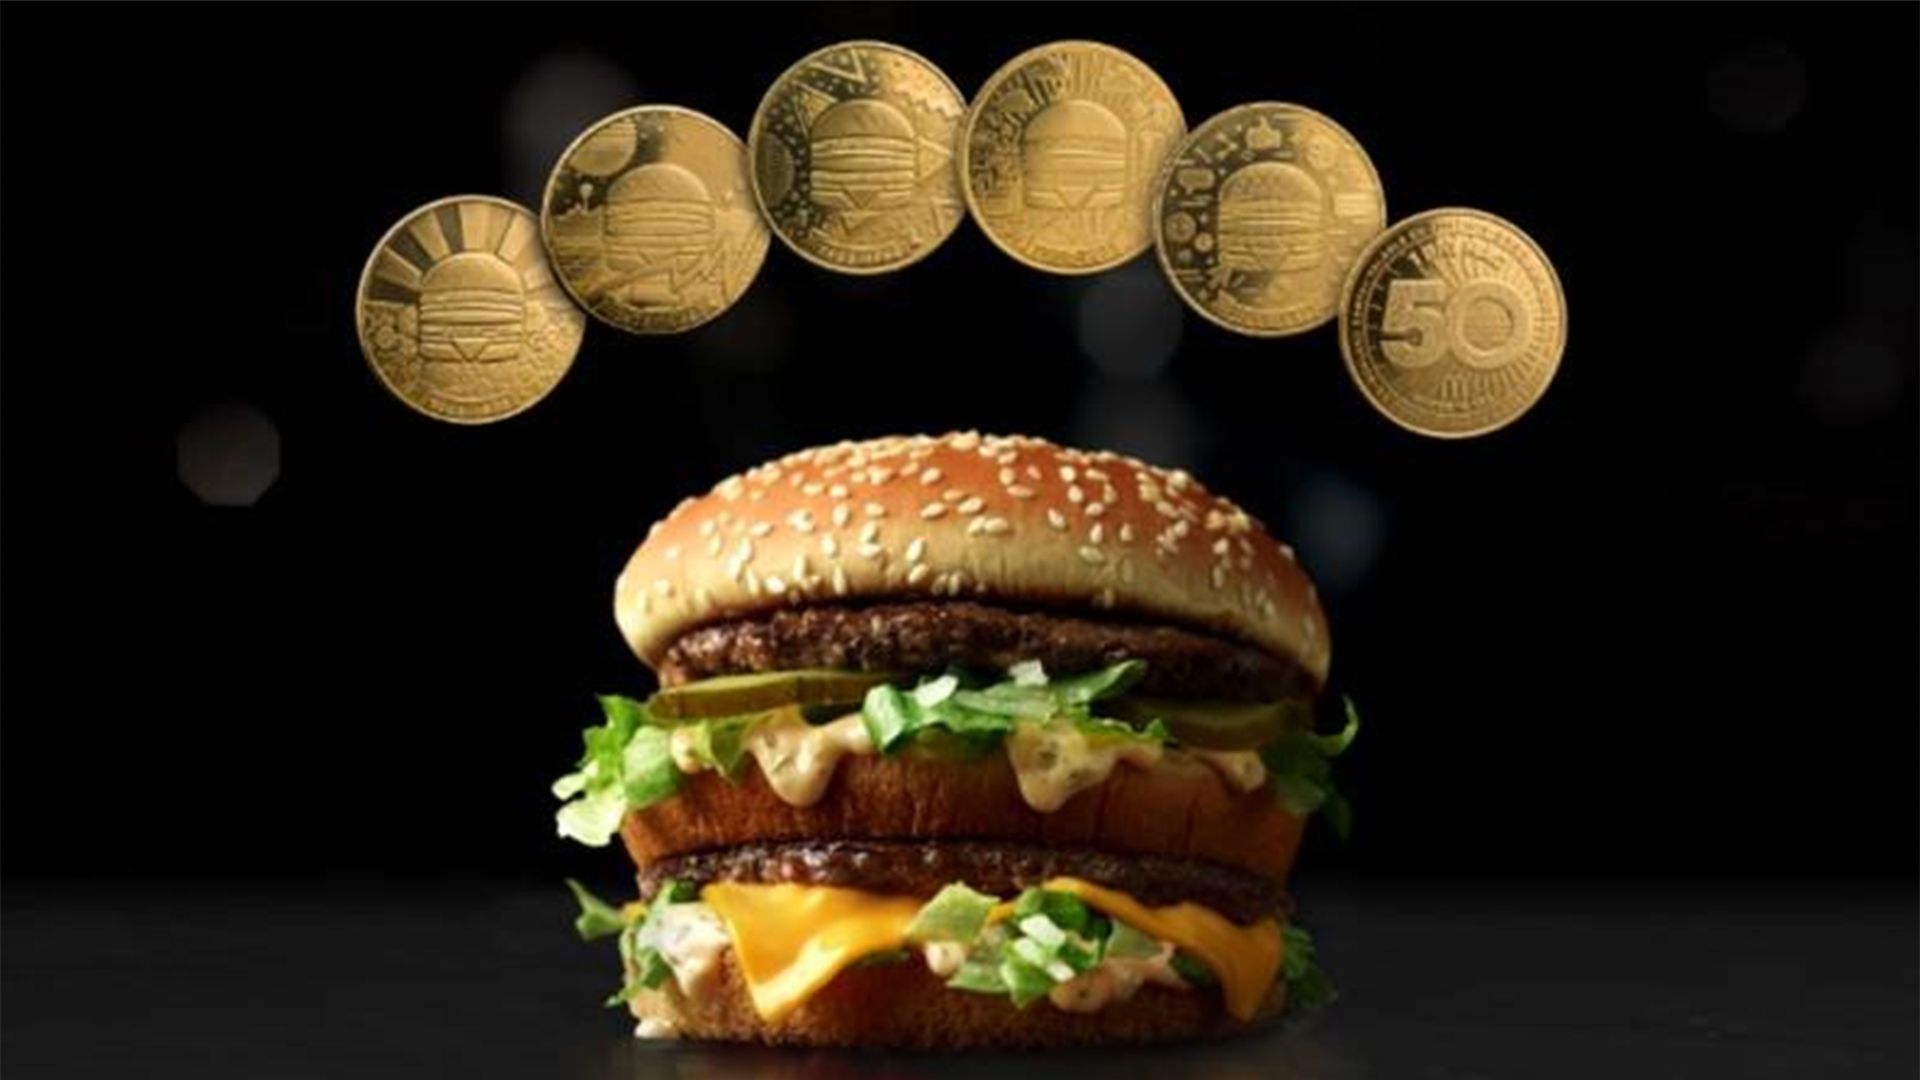 McDonald's Is Giving Away Free Big Macs in Brampton For its 50th